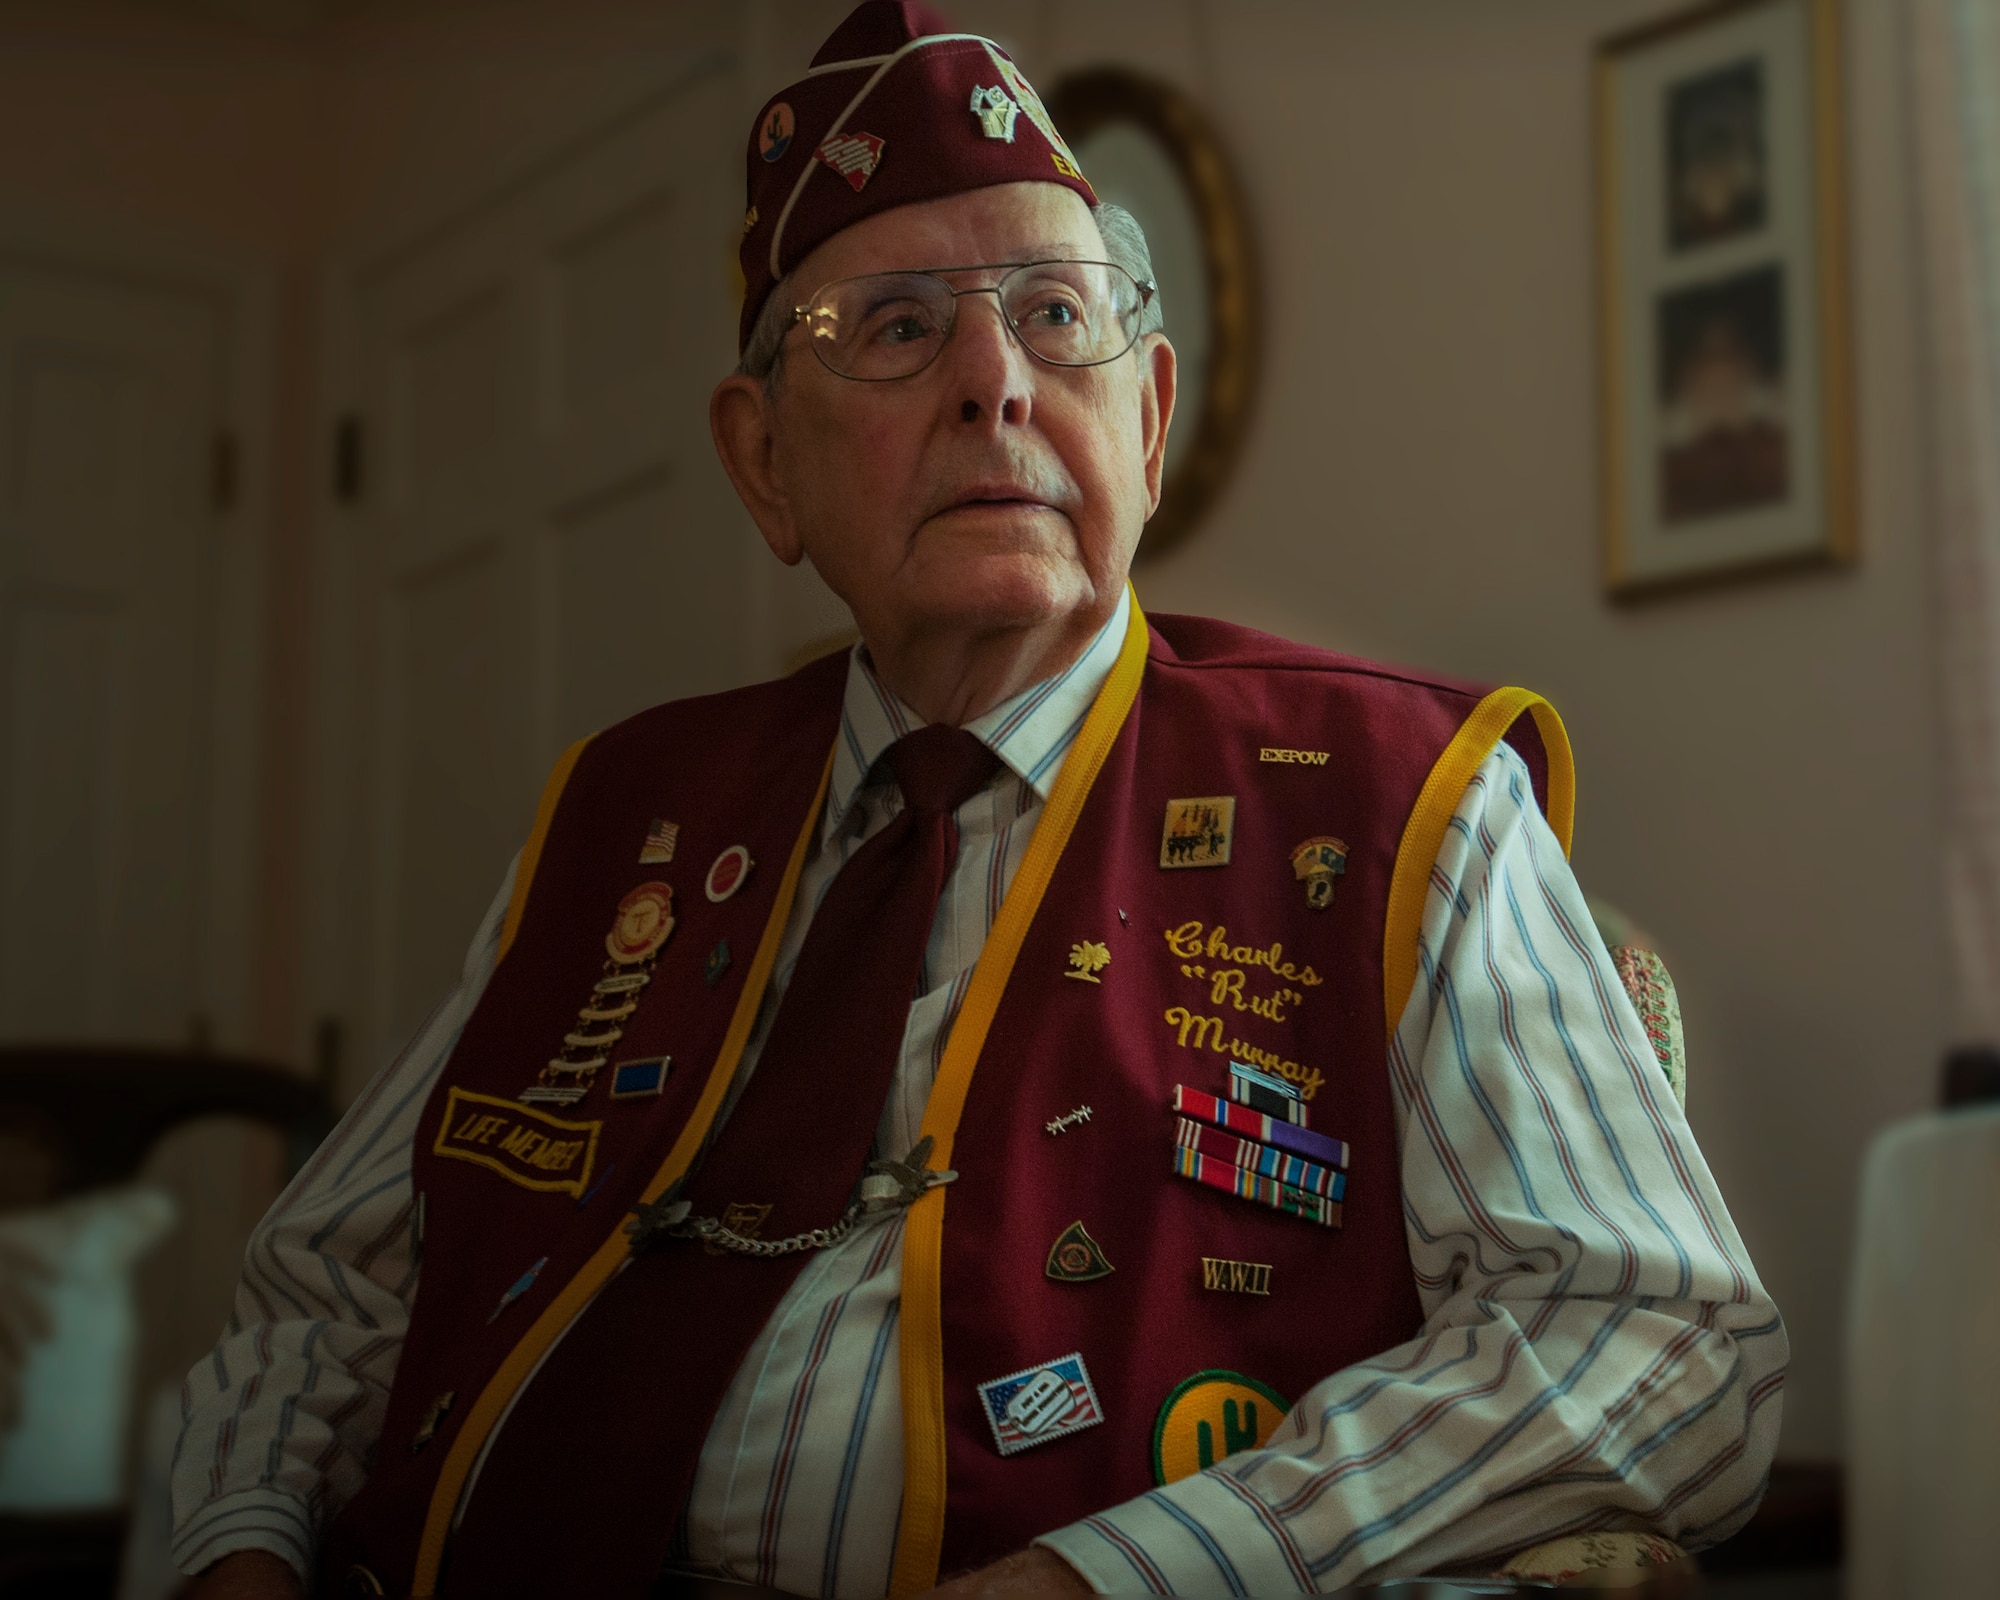 Rut Murray, 87-year-old World War II veteran and ex-Prisoner of War, explains the meaning behind the various patches and buttons on his Ex-American Prisoner of War – Lowcountry Chapter jacket at his home in Saint George, S.C. Murray was awarded the Bronze Star, Purple Heart and Prisoner of War Medals among many others during his military career. Murray spent 97 days as an American POW during World War II. He weighed only 97 pounds when he was liberated toward the end of the war. (U.S. Air Force Photo / Airman 1st Class Tom Brading)